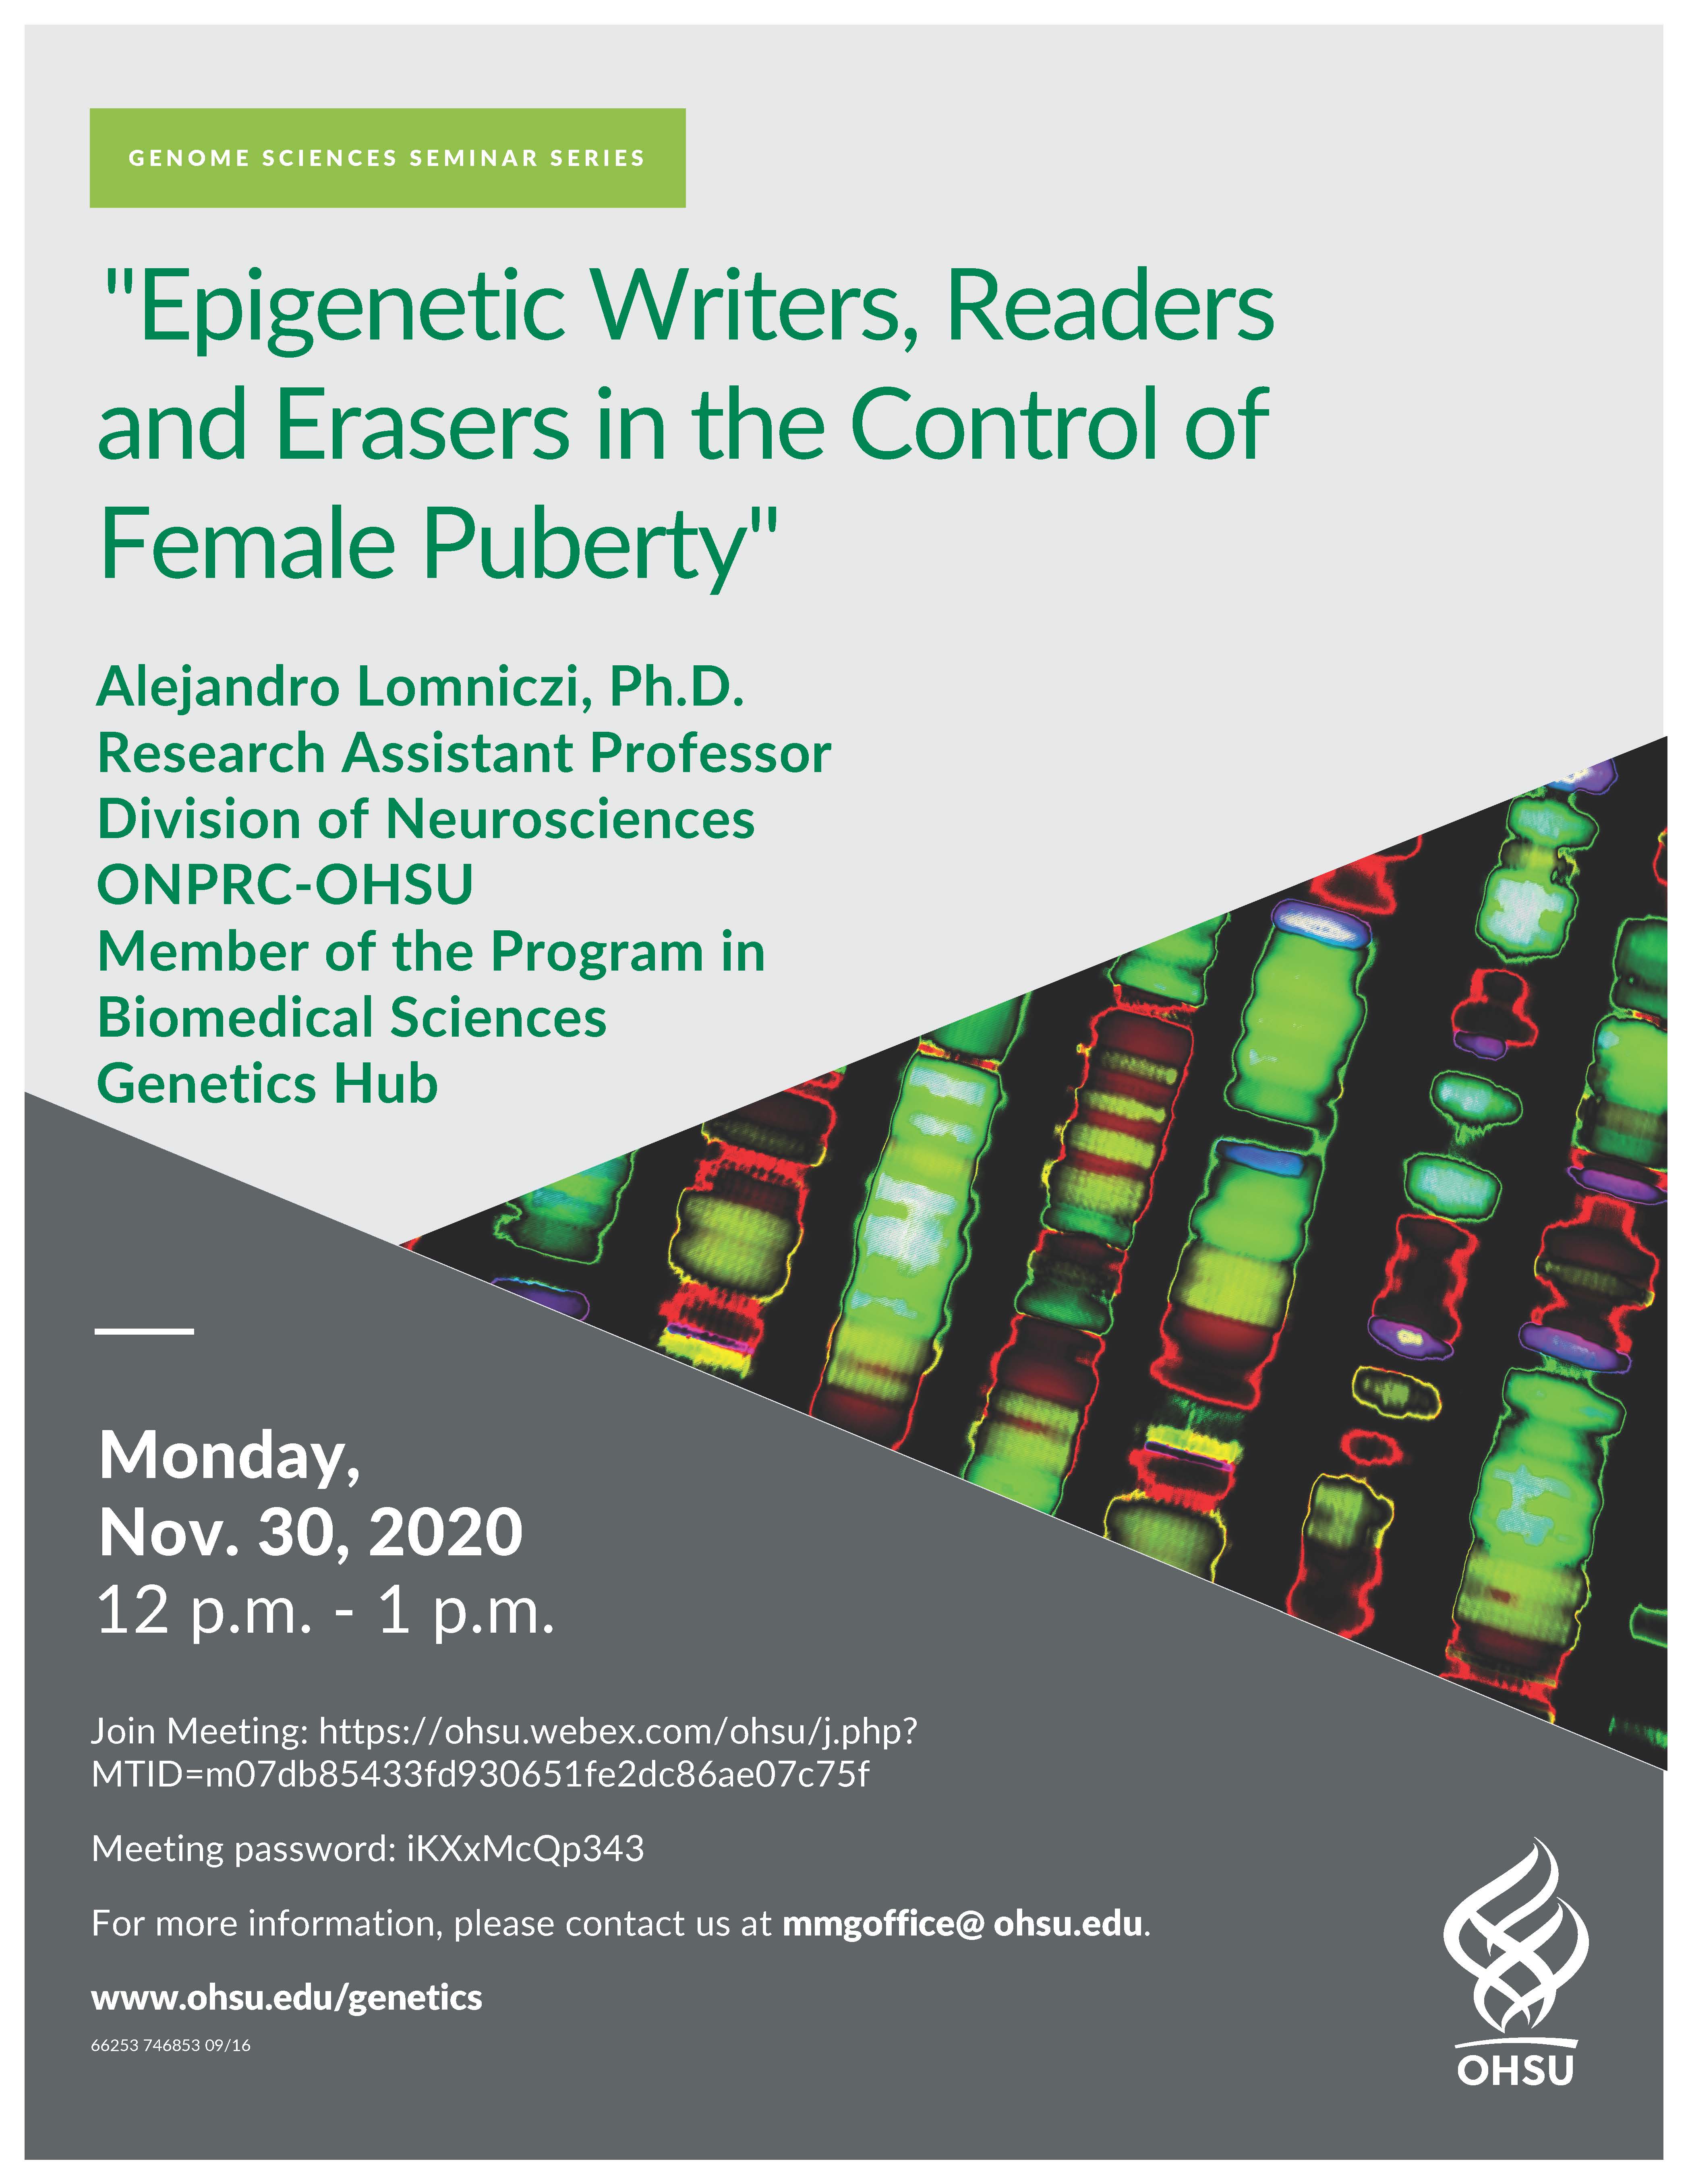 Epigenetic Writers, Readers and Erasers in the Control of Female Puberty